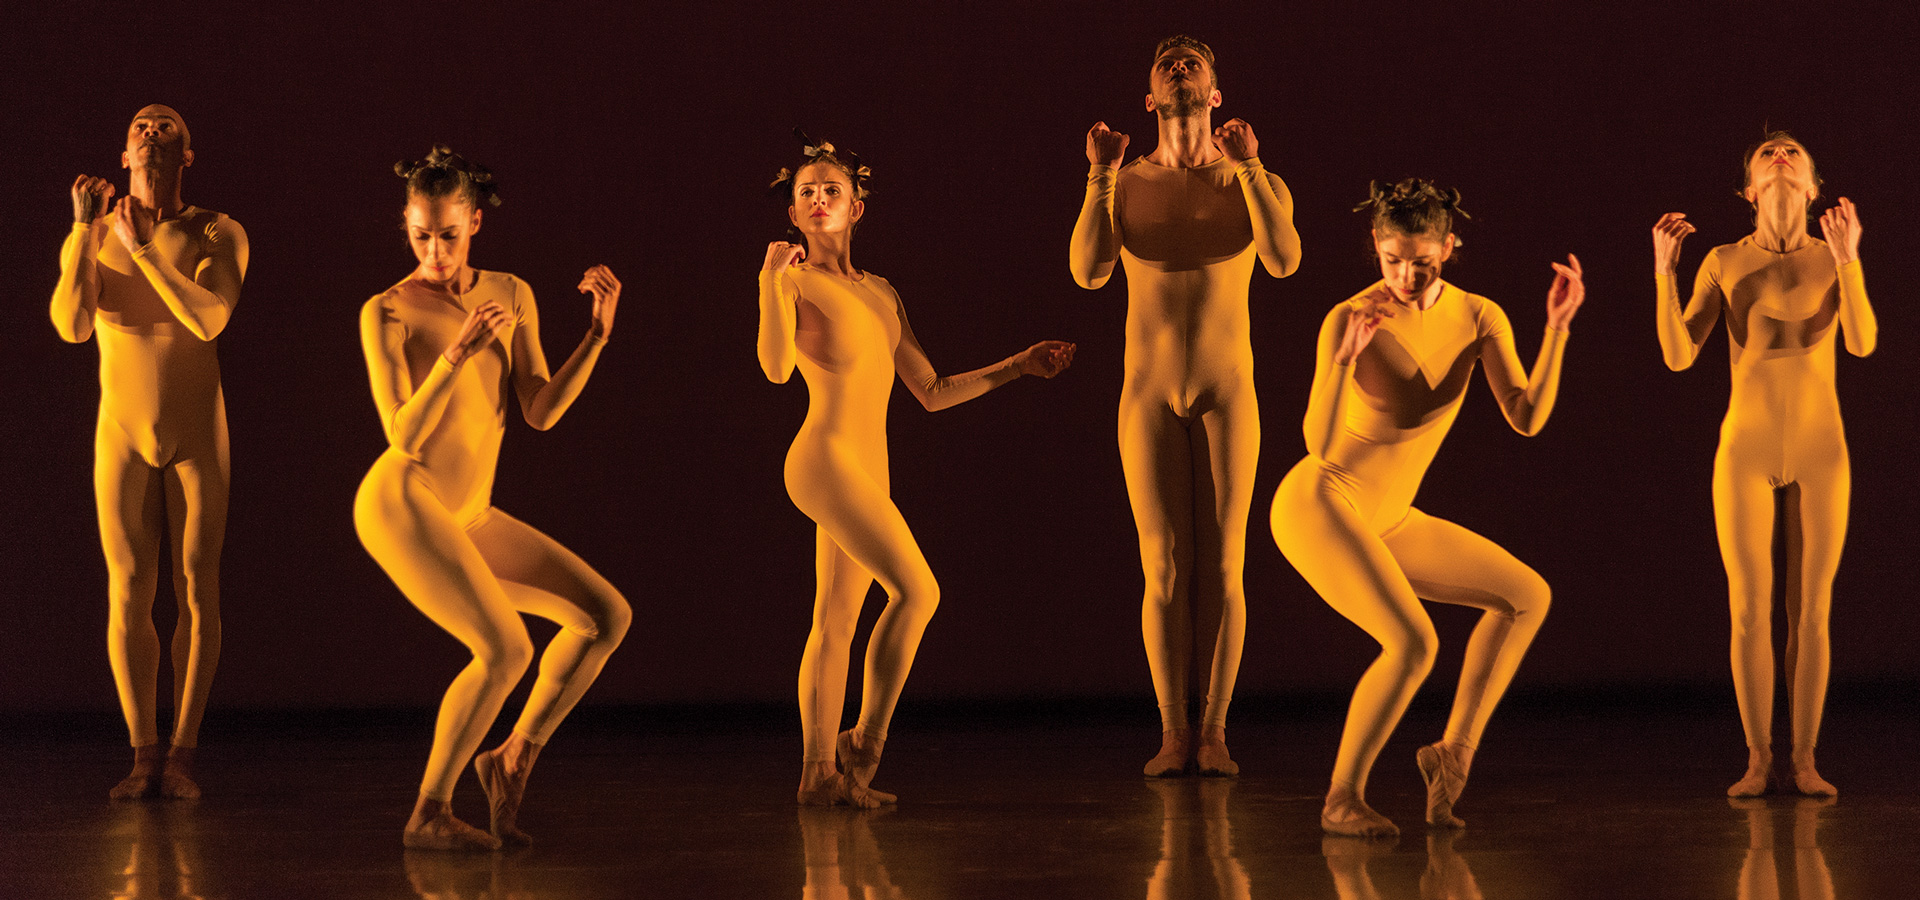 Performers in the Grupo Corpo group pose wearing yellow unitards, illuminated by a dim, glowy light.